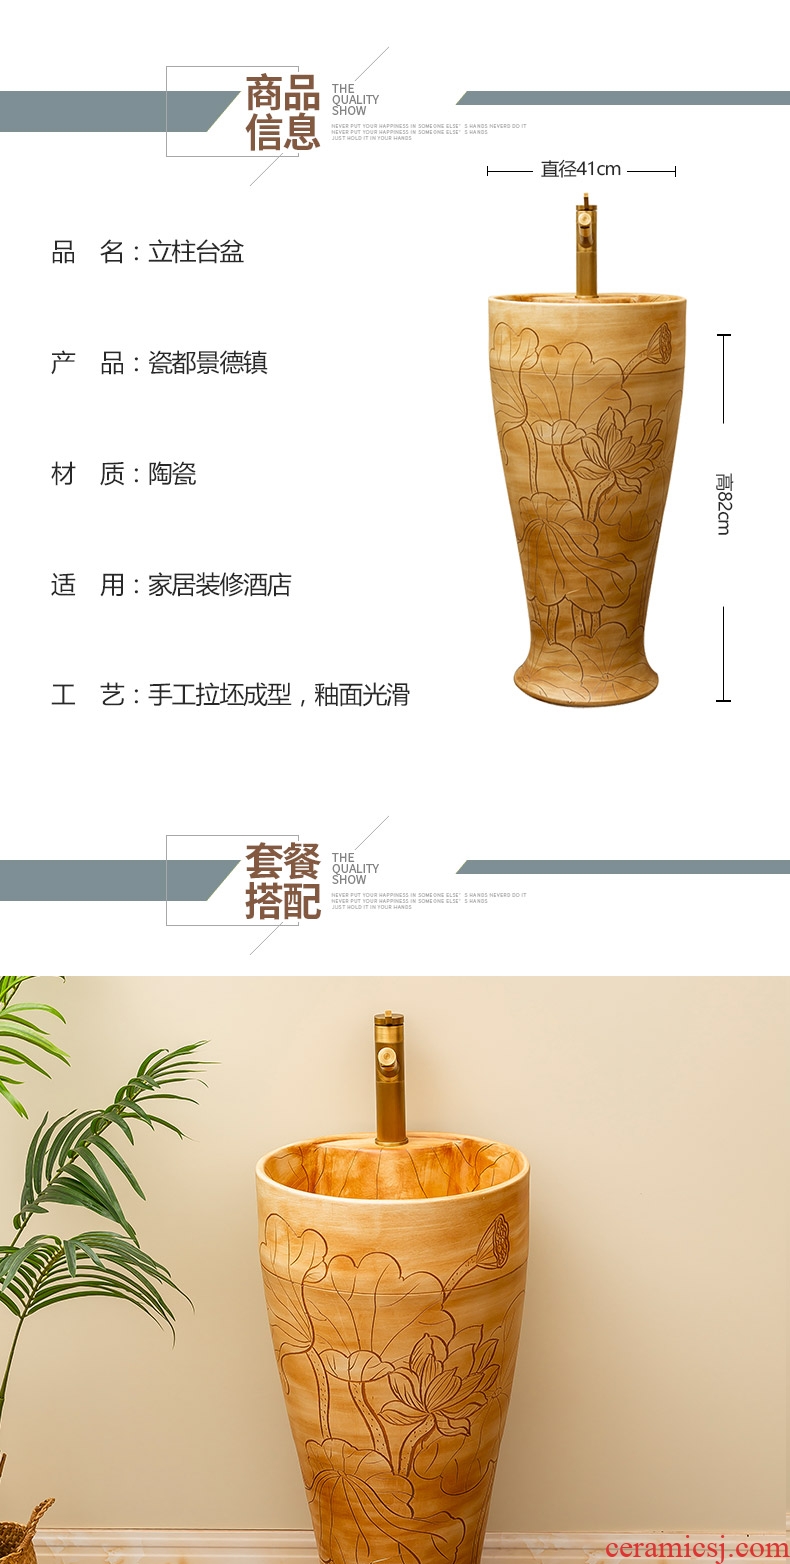 One - piece pillar carved lotus ceramics basin floor balcony is suing household toilet lavabo lavatory